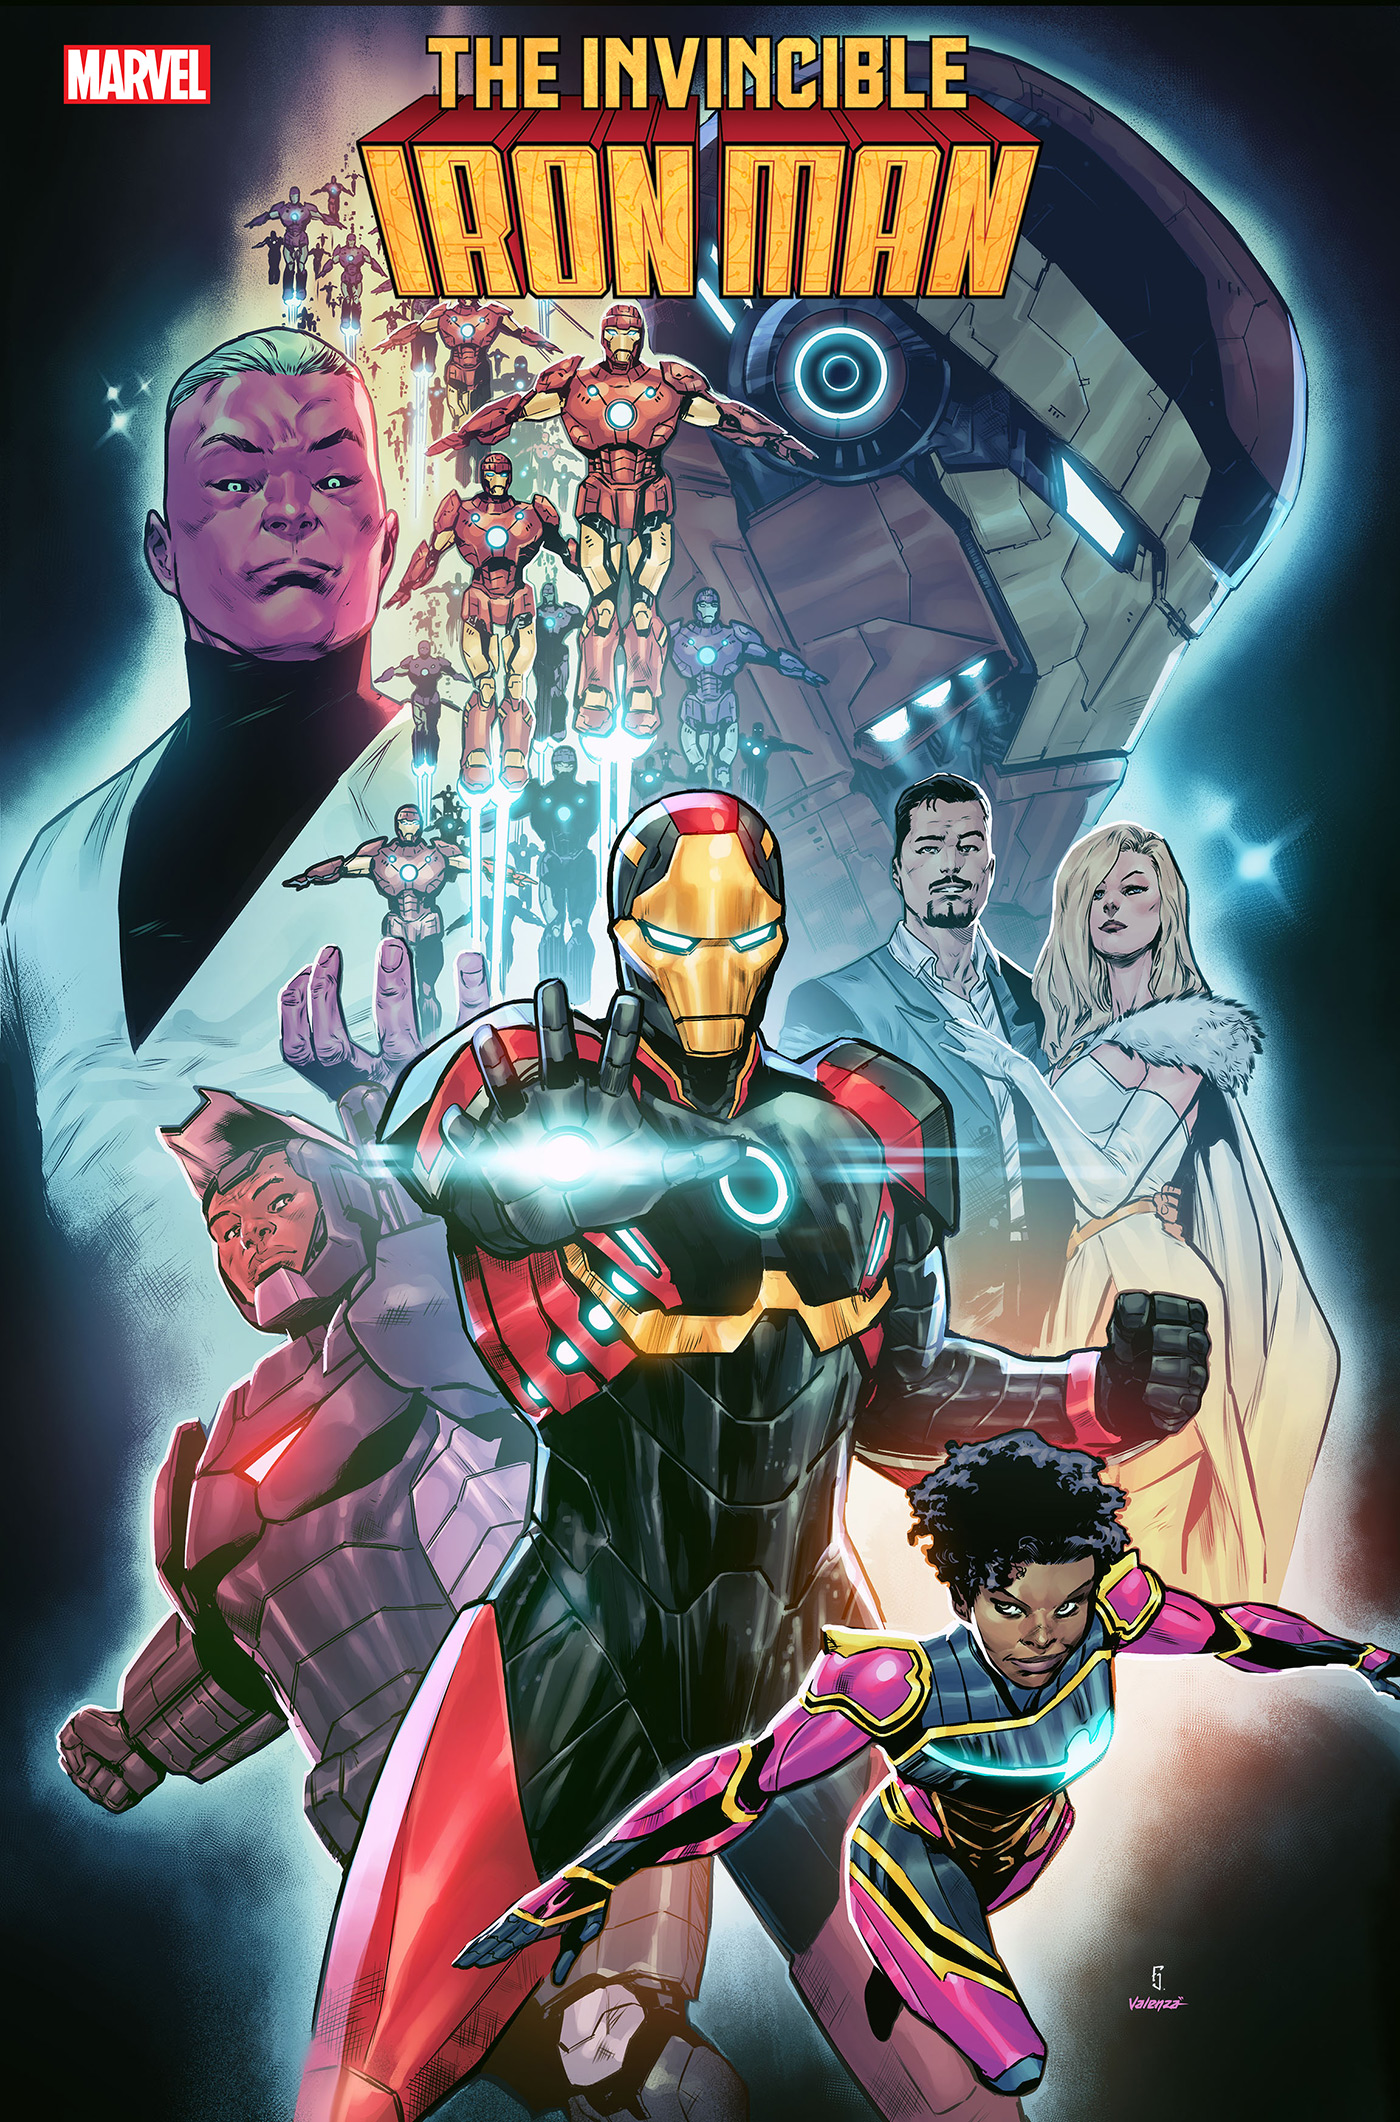 EXCLUSIVE Marvel Preview: Invincible Iron Man #20